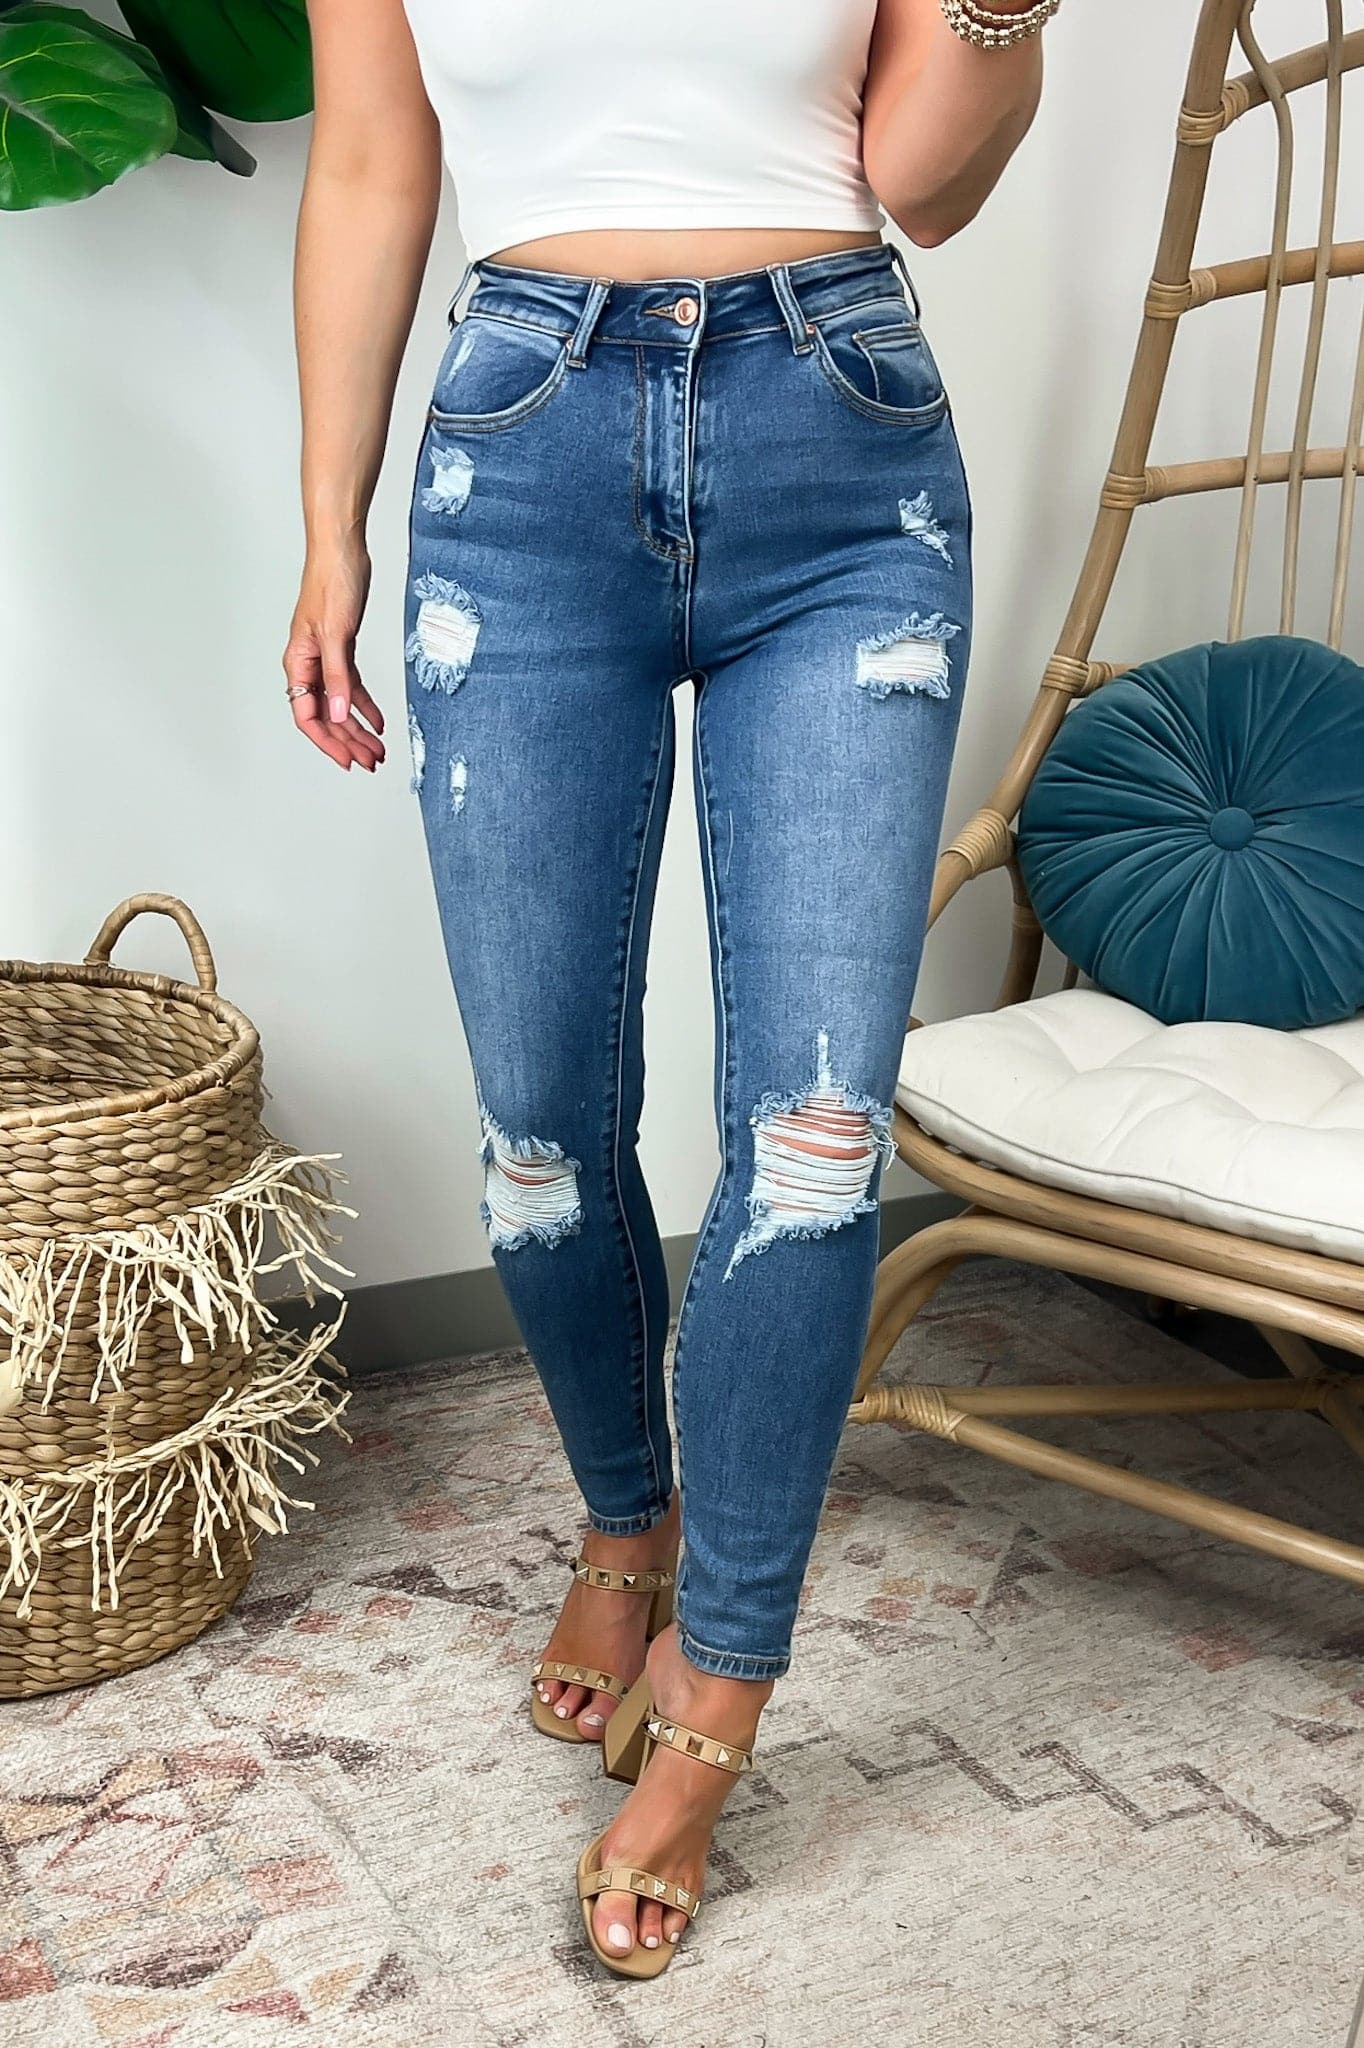 Medium Blue / 0 Confident Charisma Vintage Push-Up High Rise Skinny Jeans - FINAL SALE - Madison and Mallory